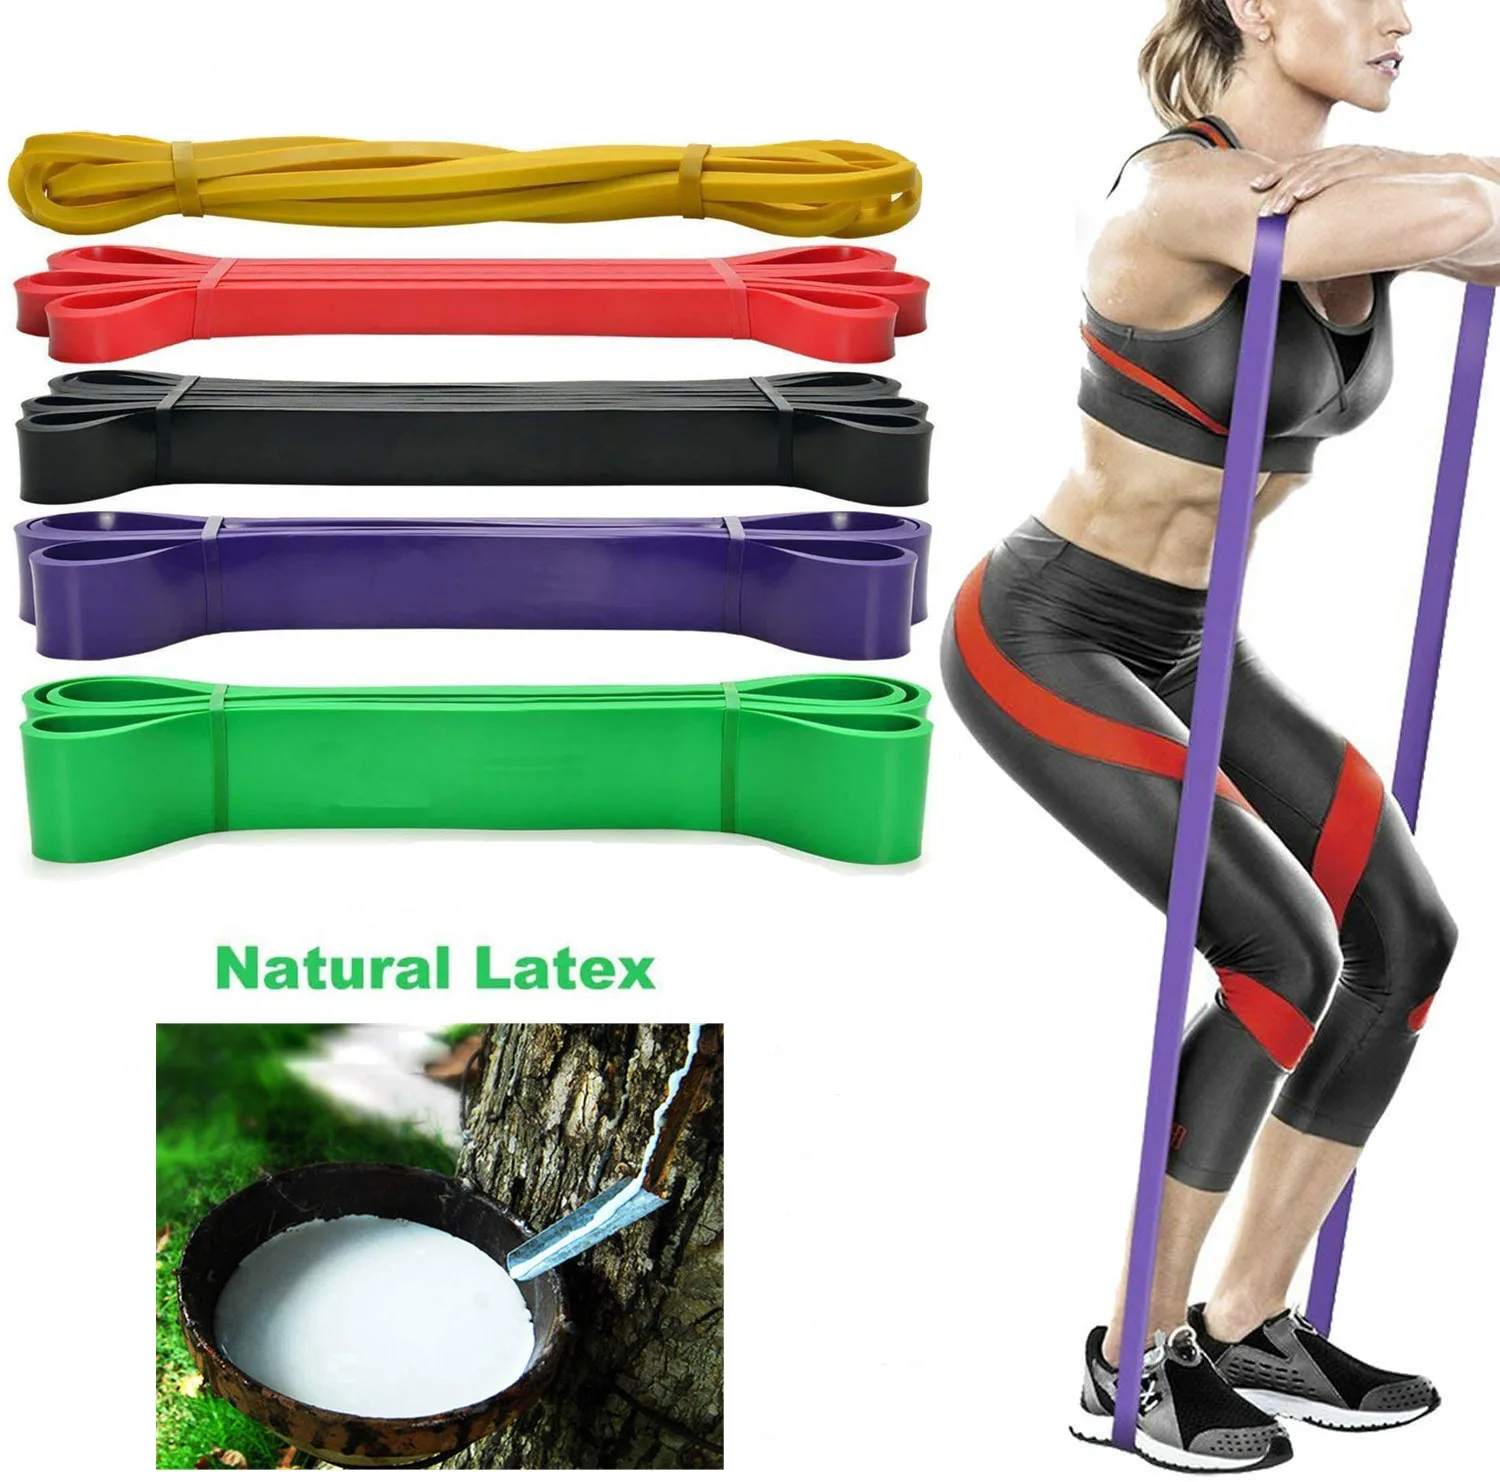 5x Yoga Resistant Bands Natural Latex Gym Fitness Stretch Loop Exercise Training 